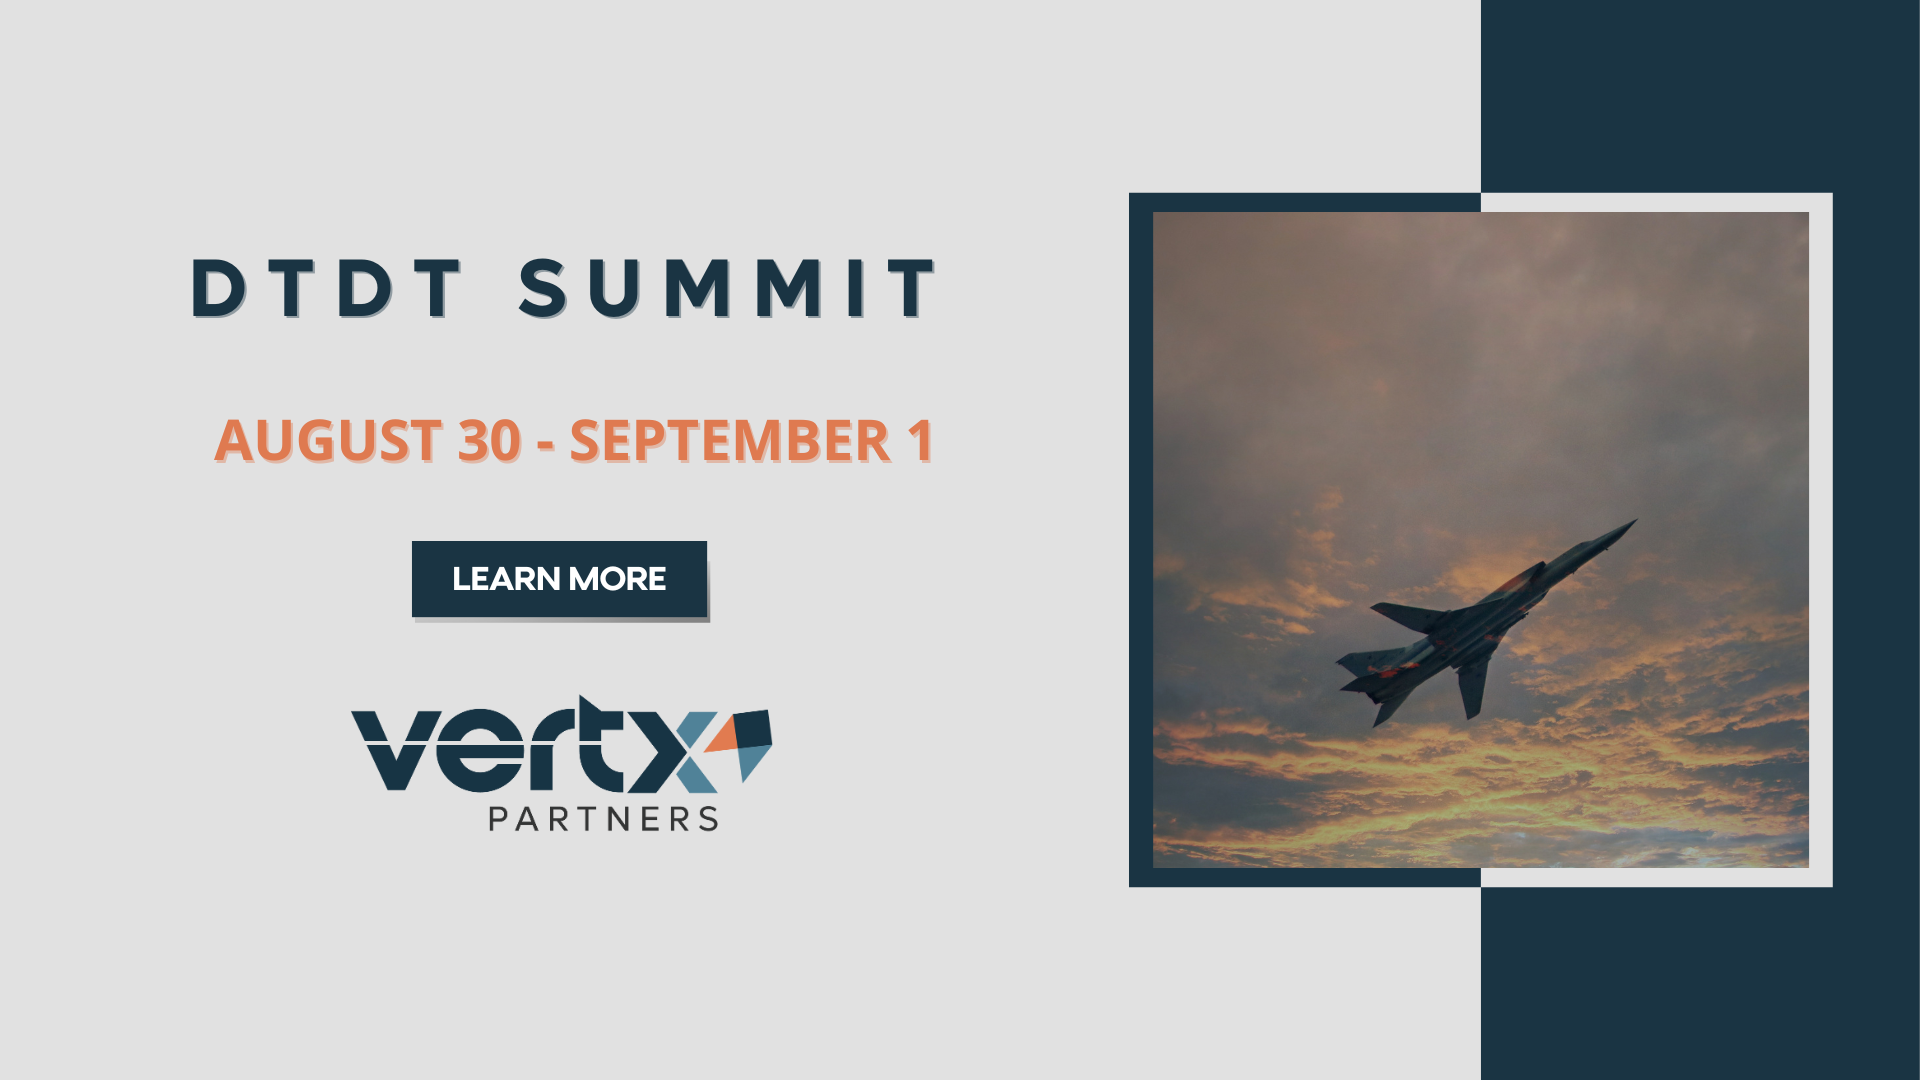 This graphic has the title "DTDT Summit" with the dates underneath august 30 through september 1 with a plane in the sky to the right of it. The sky is orange and blue with clouds covering it.